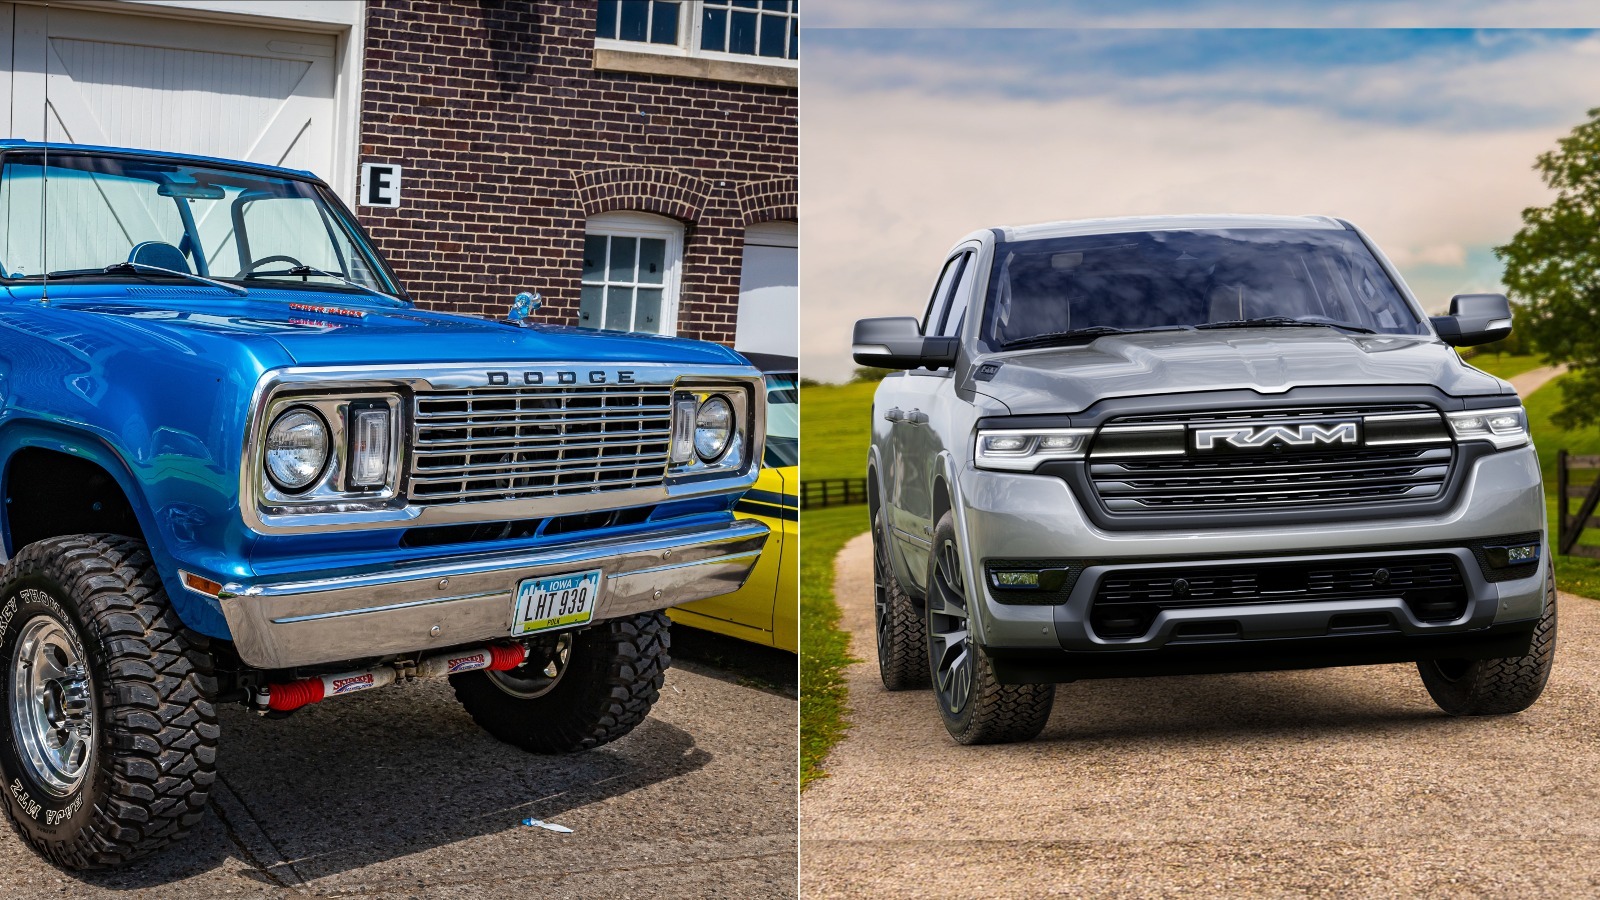 5 Features Of The New Ramcharger EV That Dodge's OG SUV Never Had